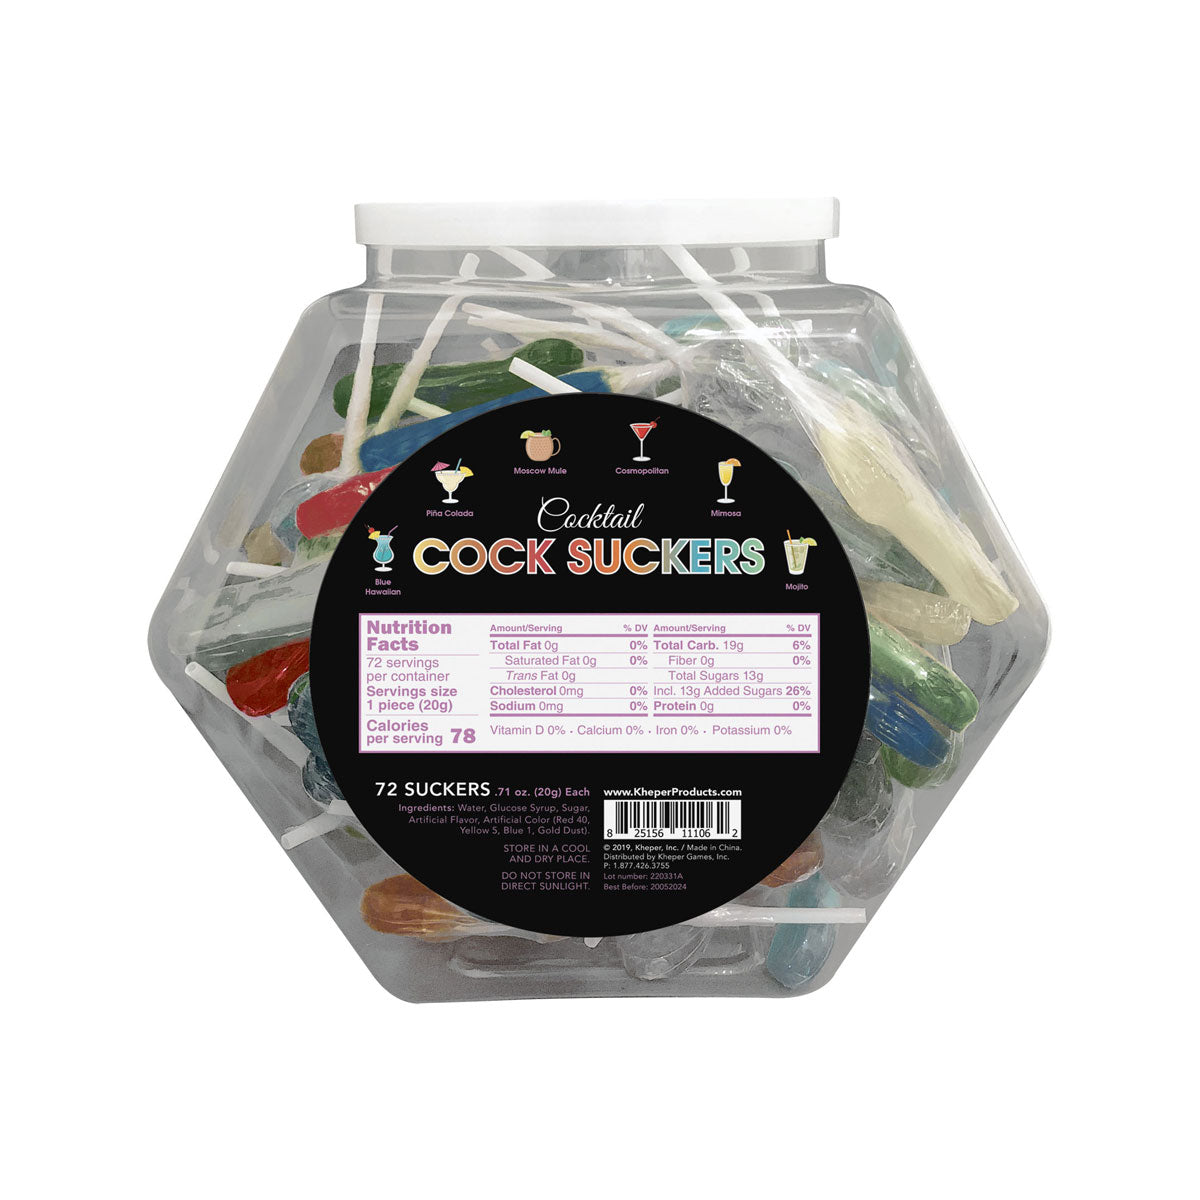 Kheper Games - Cocktail Cock Suckers Candy – Display of 72